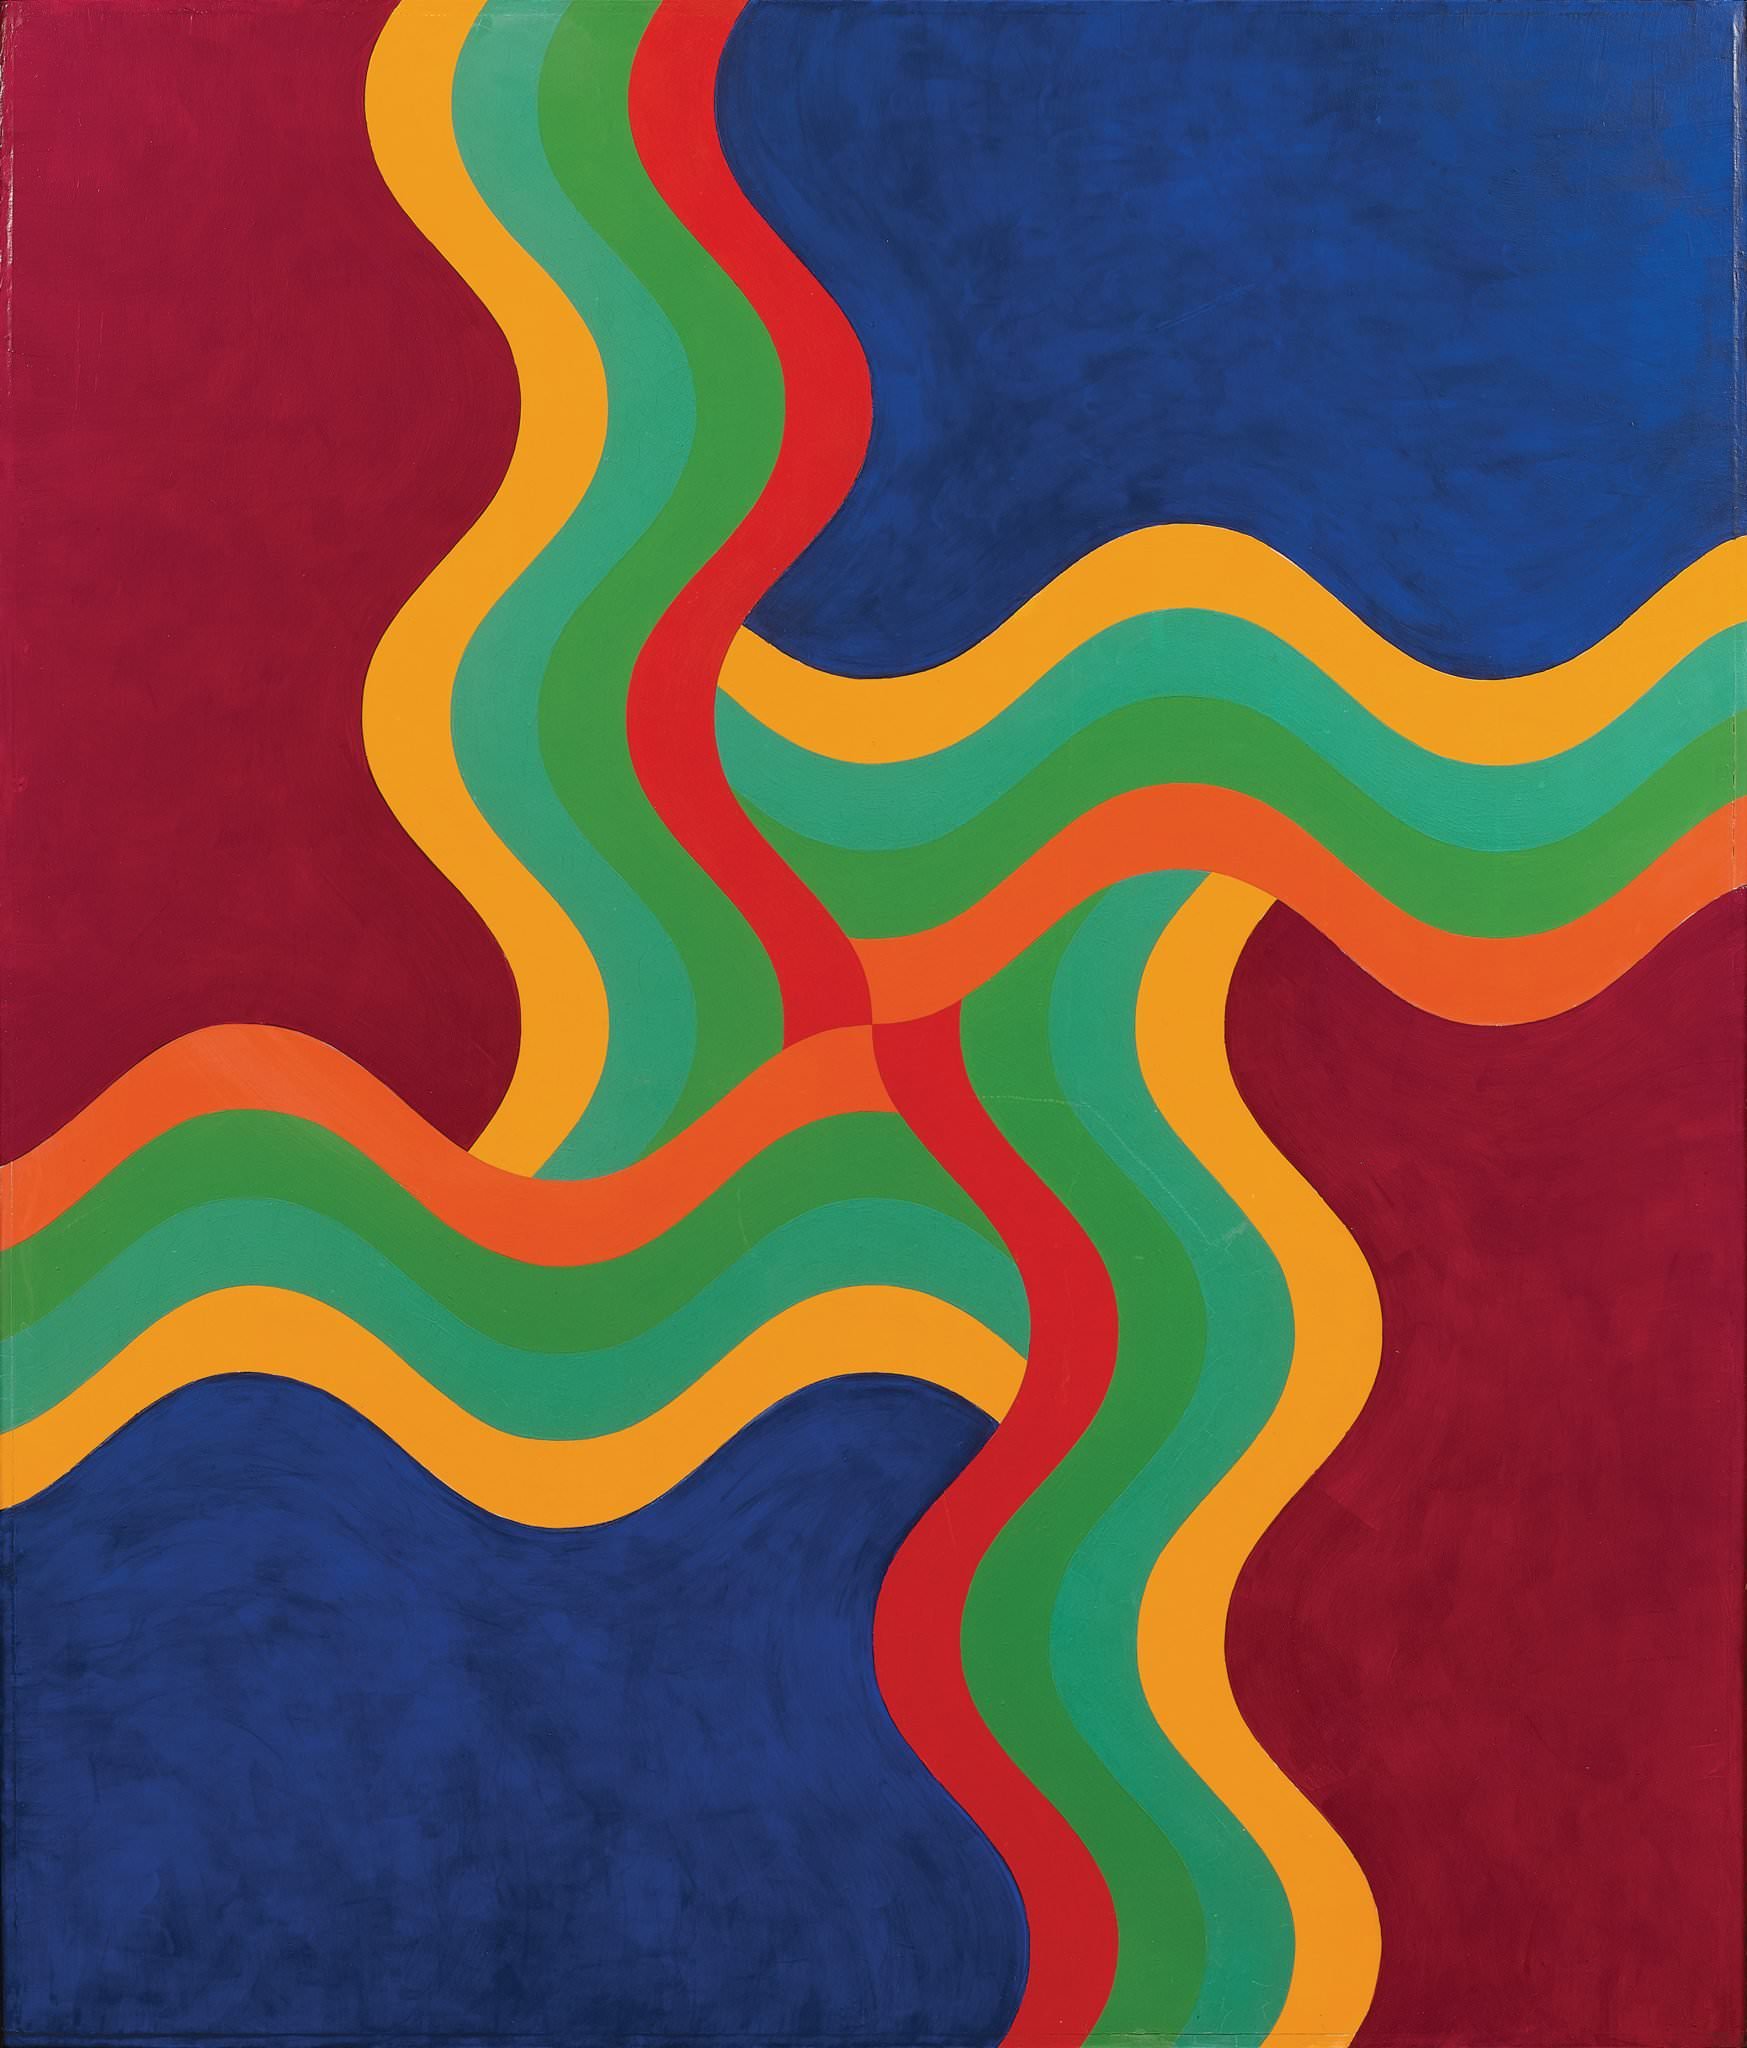 Mohamed Melehi (Morocco), Composition, 1970 Acrylic on wood, 47 1/4 x 39 3/8 in. Collection of the Barjeel Art Foundation, Sharjah, UAE.